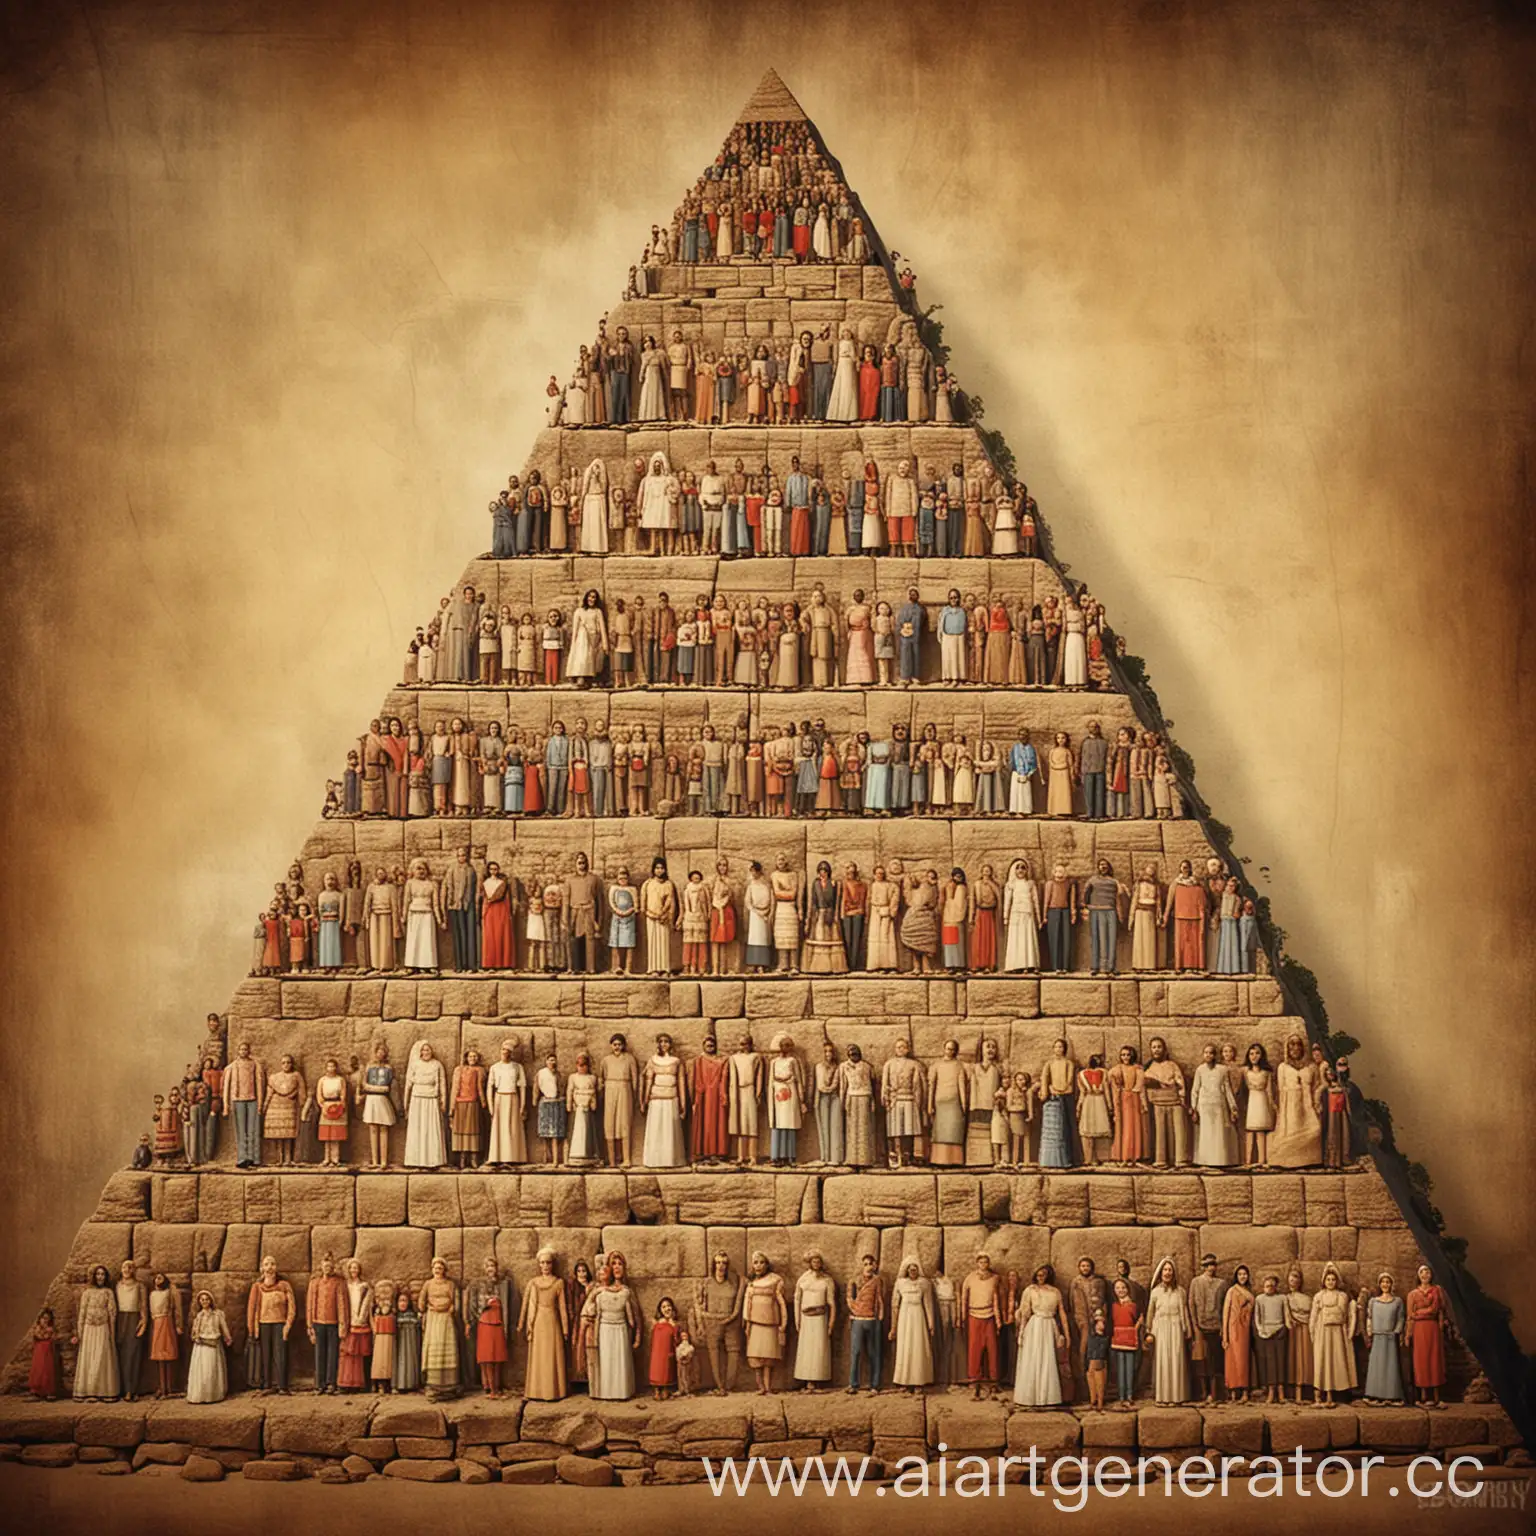 Multigenerational-Family-History-Depicted-as-Pyramid-Wall